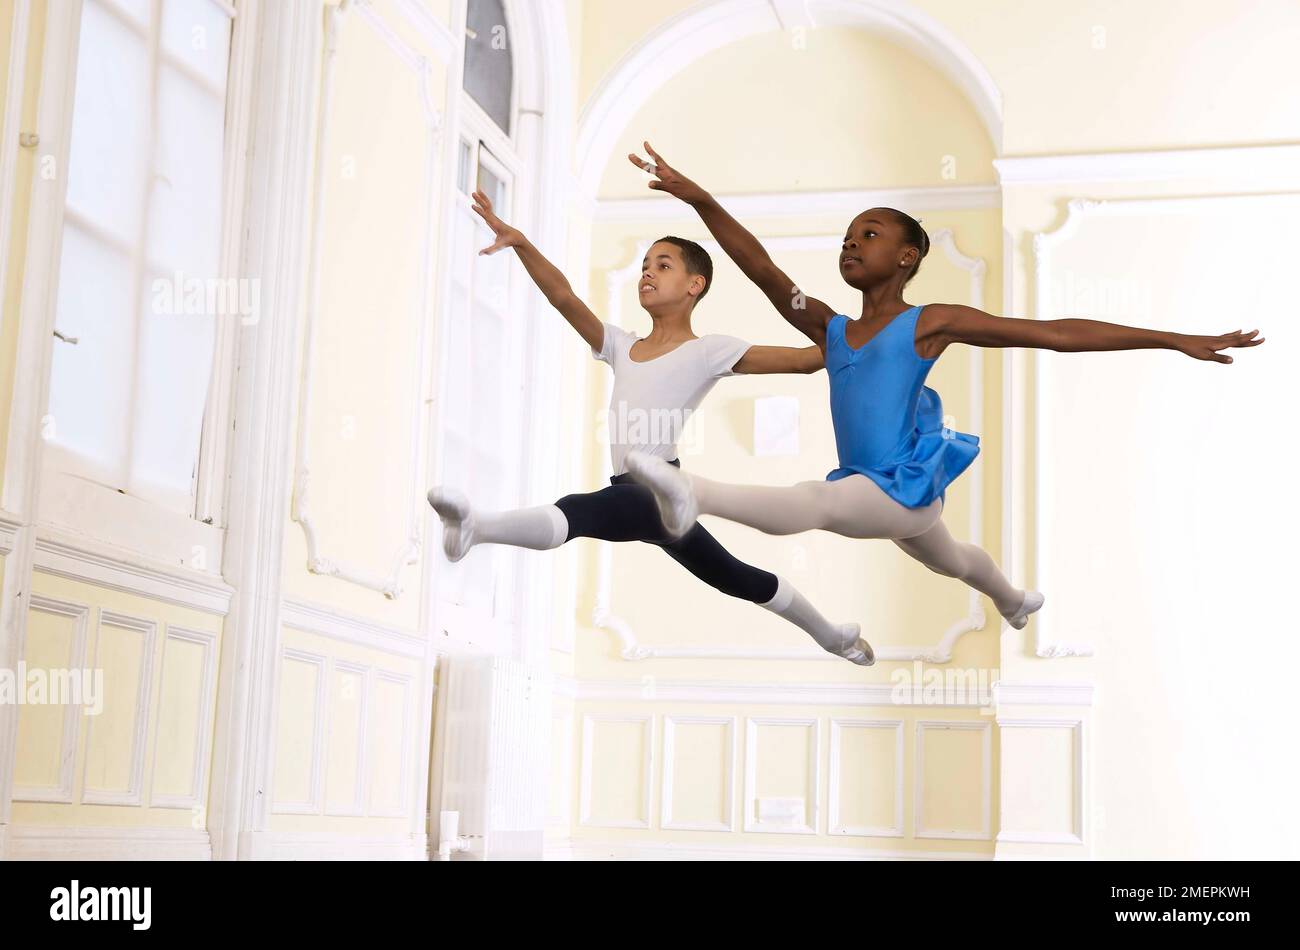 Boy and girl ballet dancers performing a grand jete jumping step Stock Photo